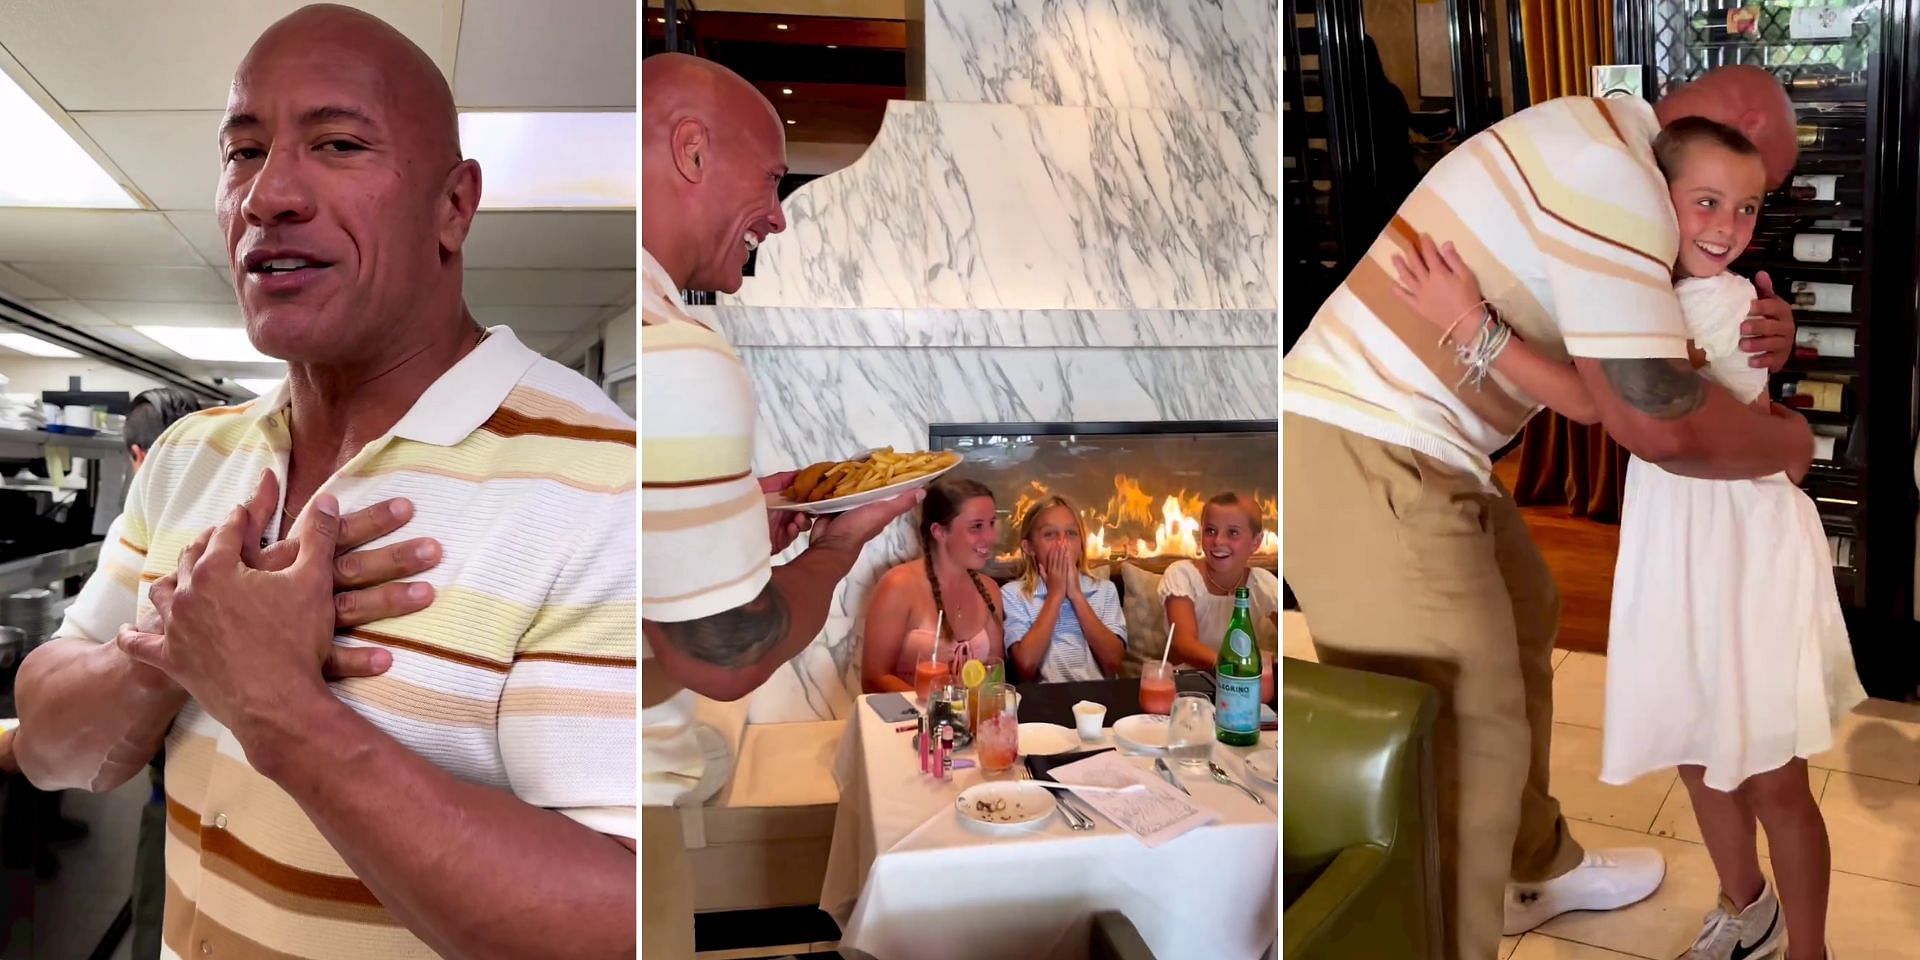 The Rock surprised a young fan as a waiter